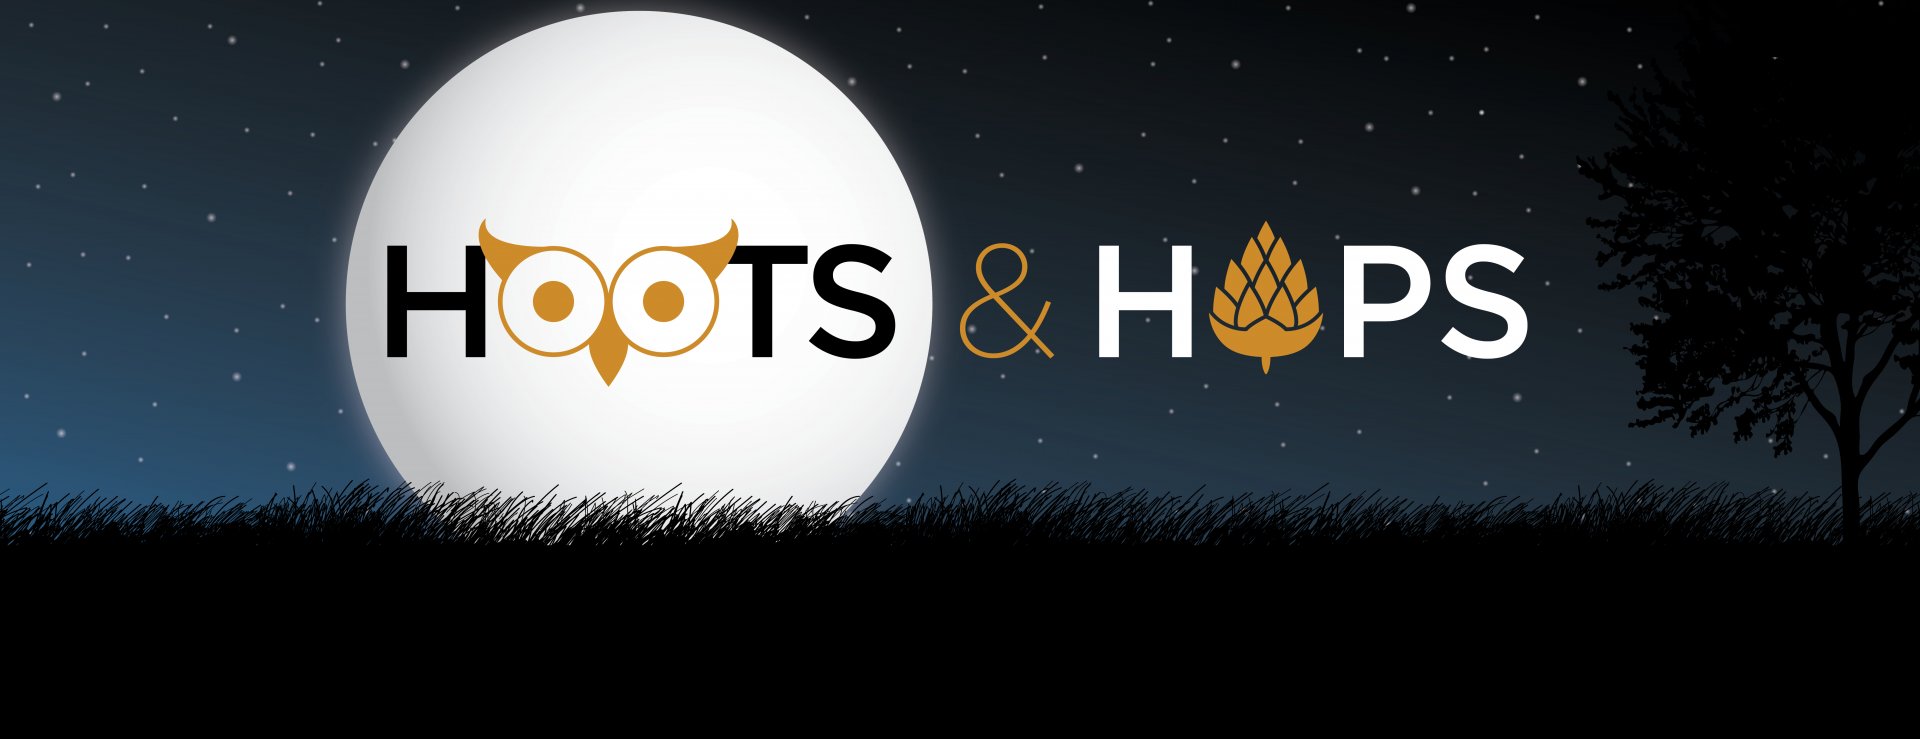 Hoots & Hops, in front of a full moon and forest scene.